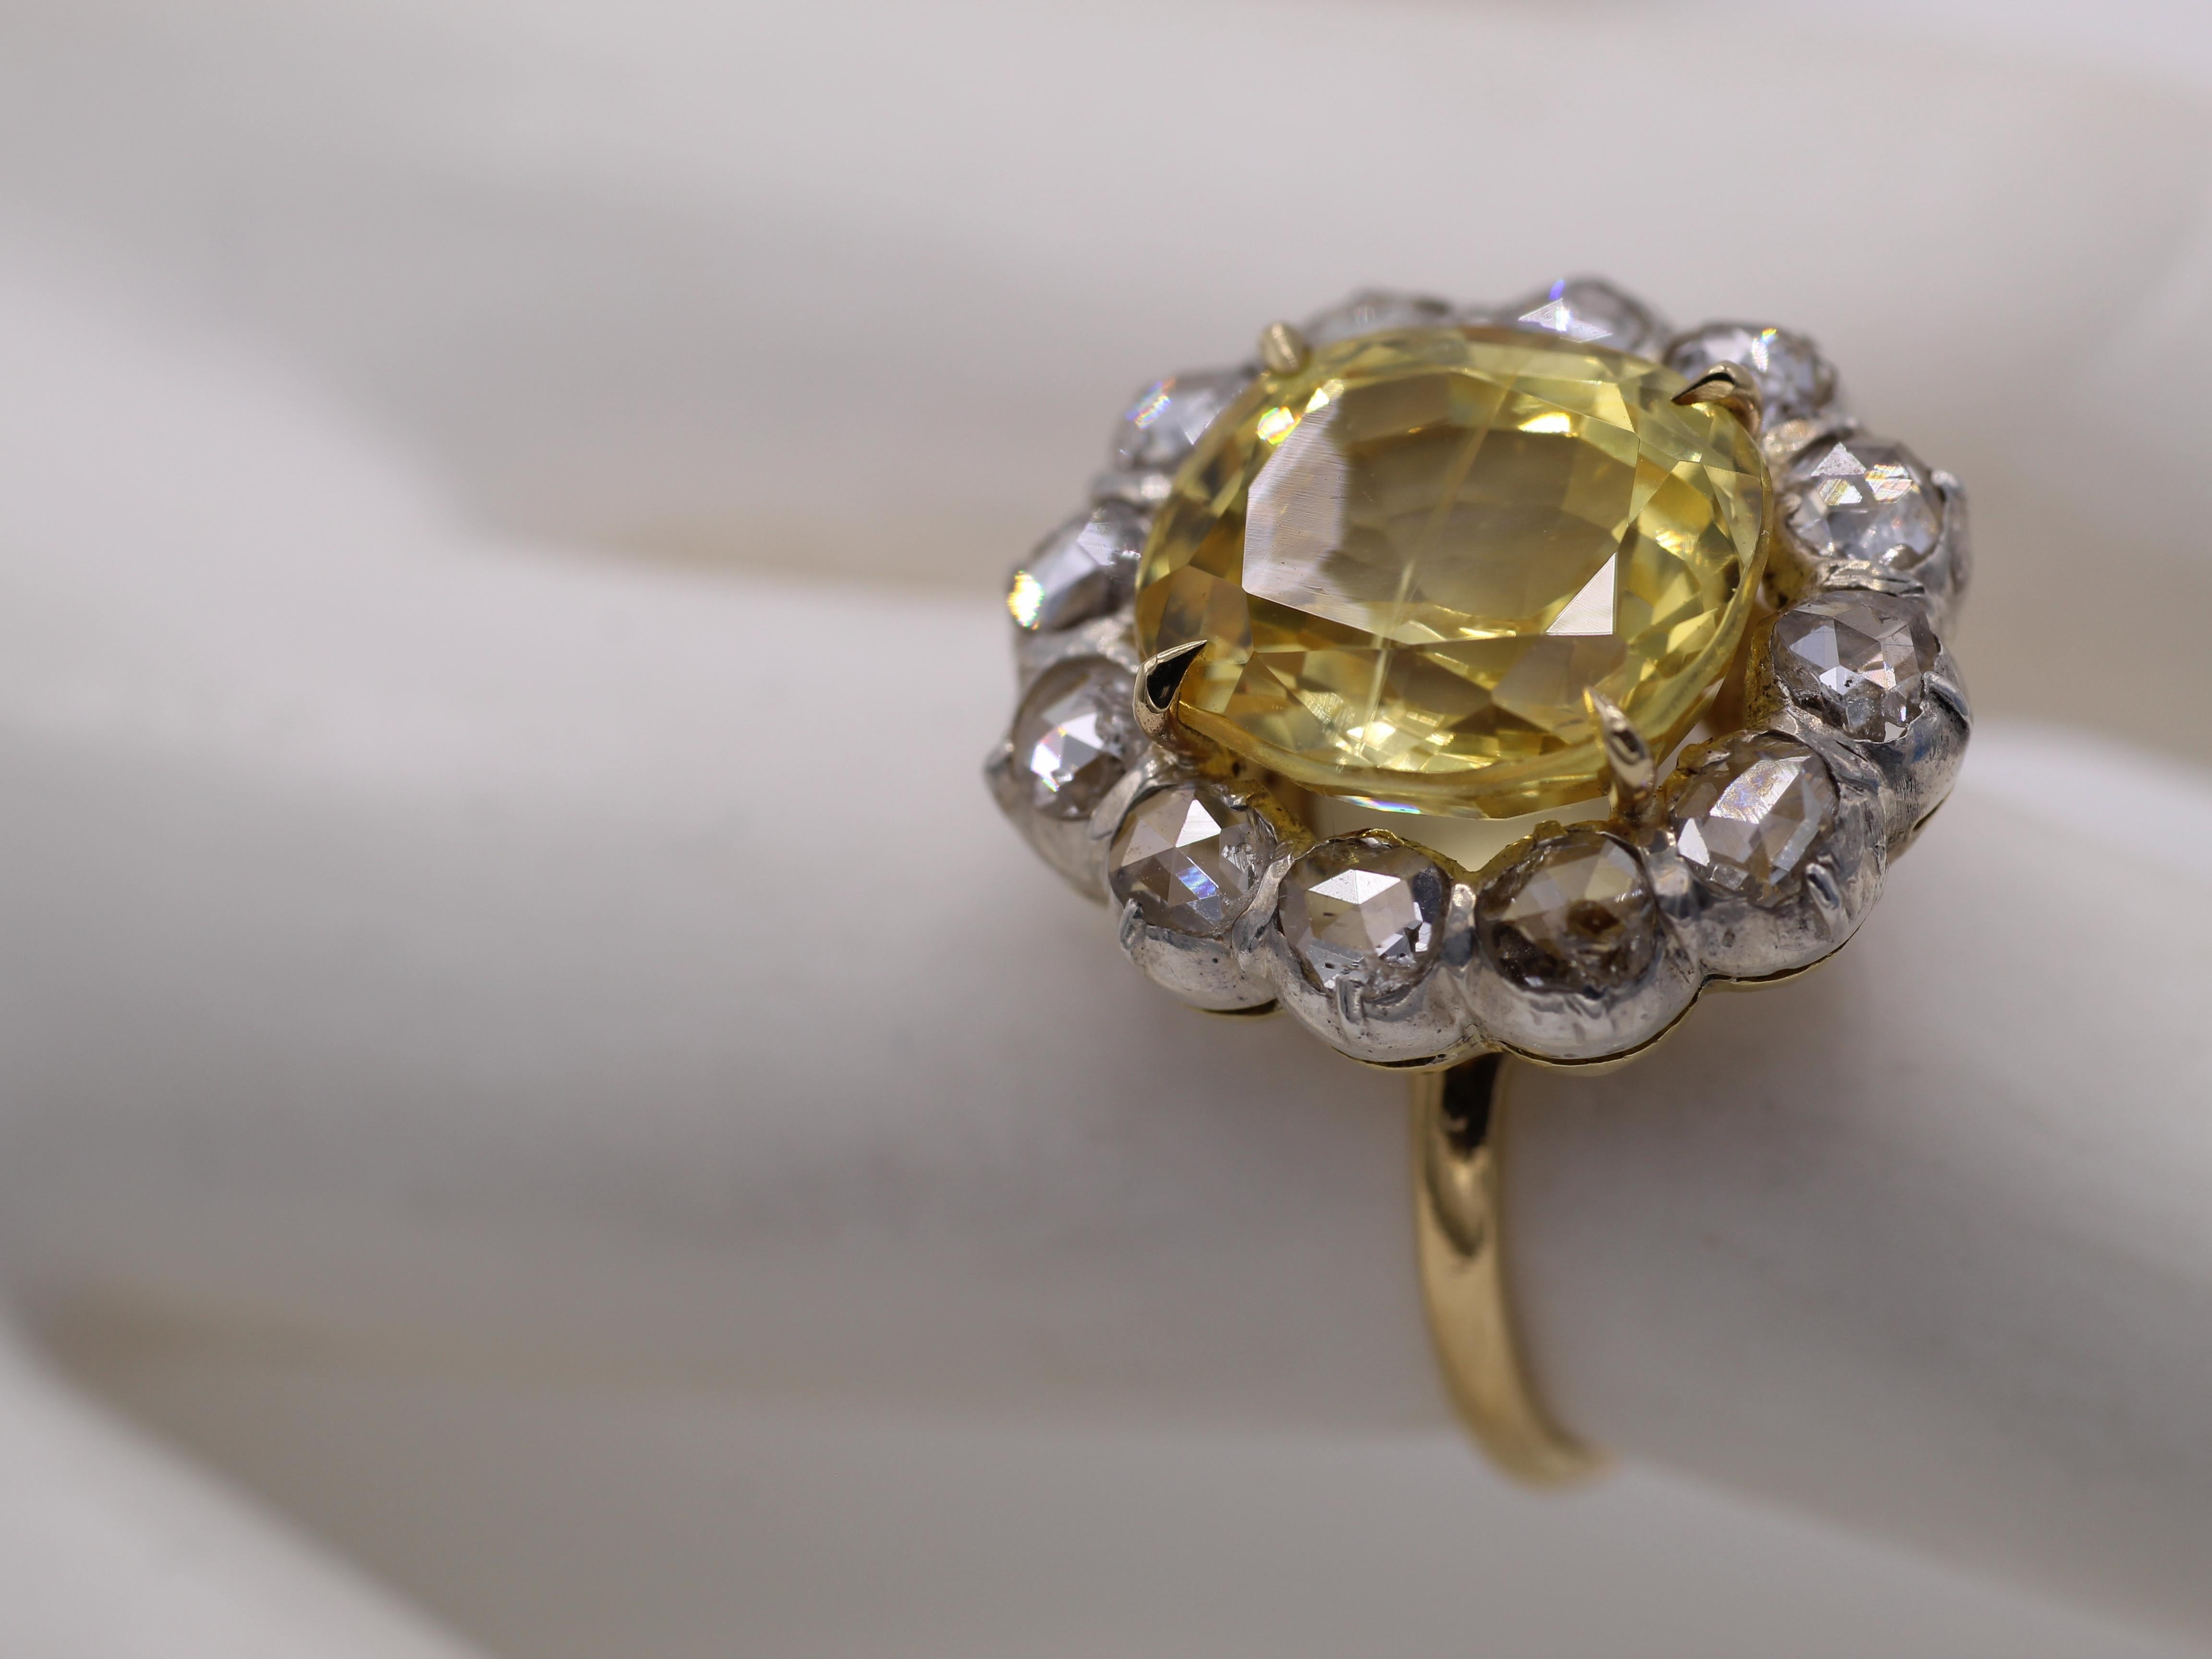 A wonderful lemon yellow oval natural no-heat yellow sapphire is the center piece of this beautiful and well handcrafted ring. Surrounded by a ring of rose cut diamonds set in silver on a gallery of yellow gold, this ring brings about a wonderful